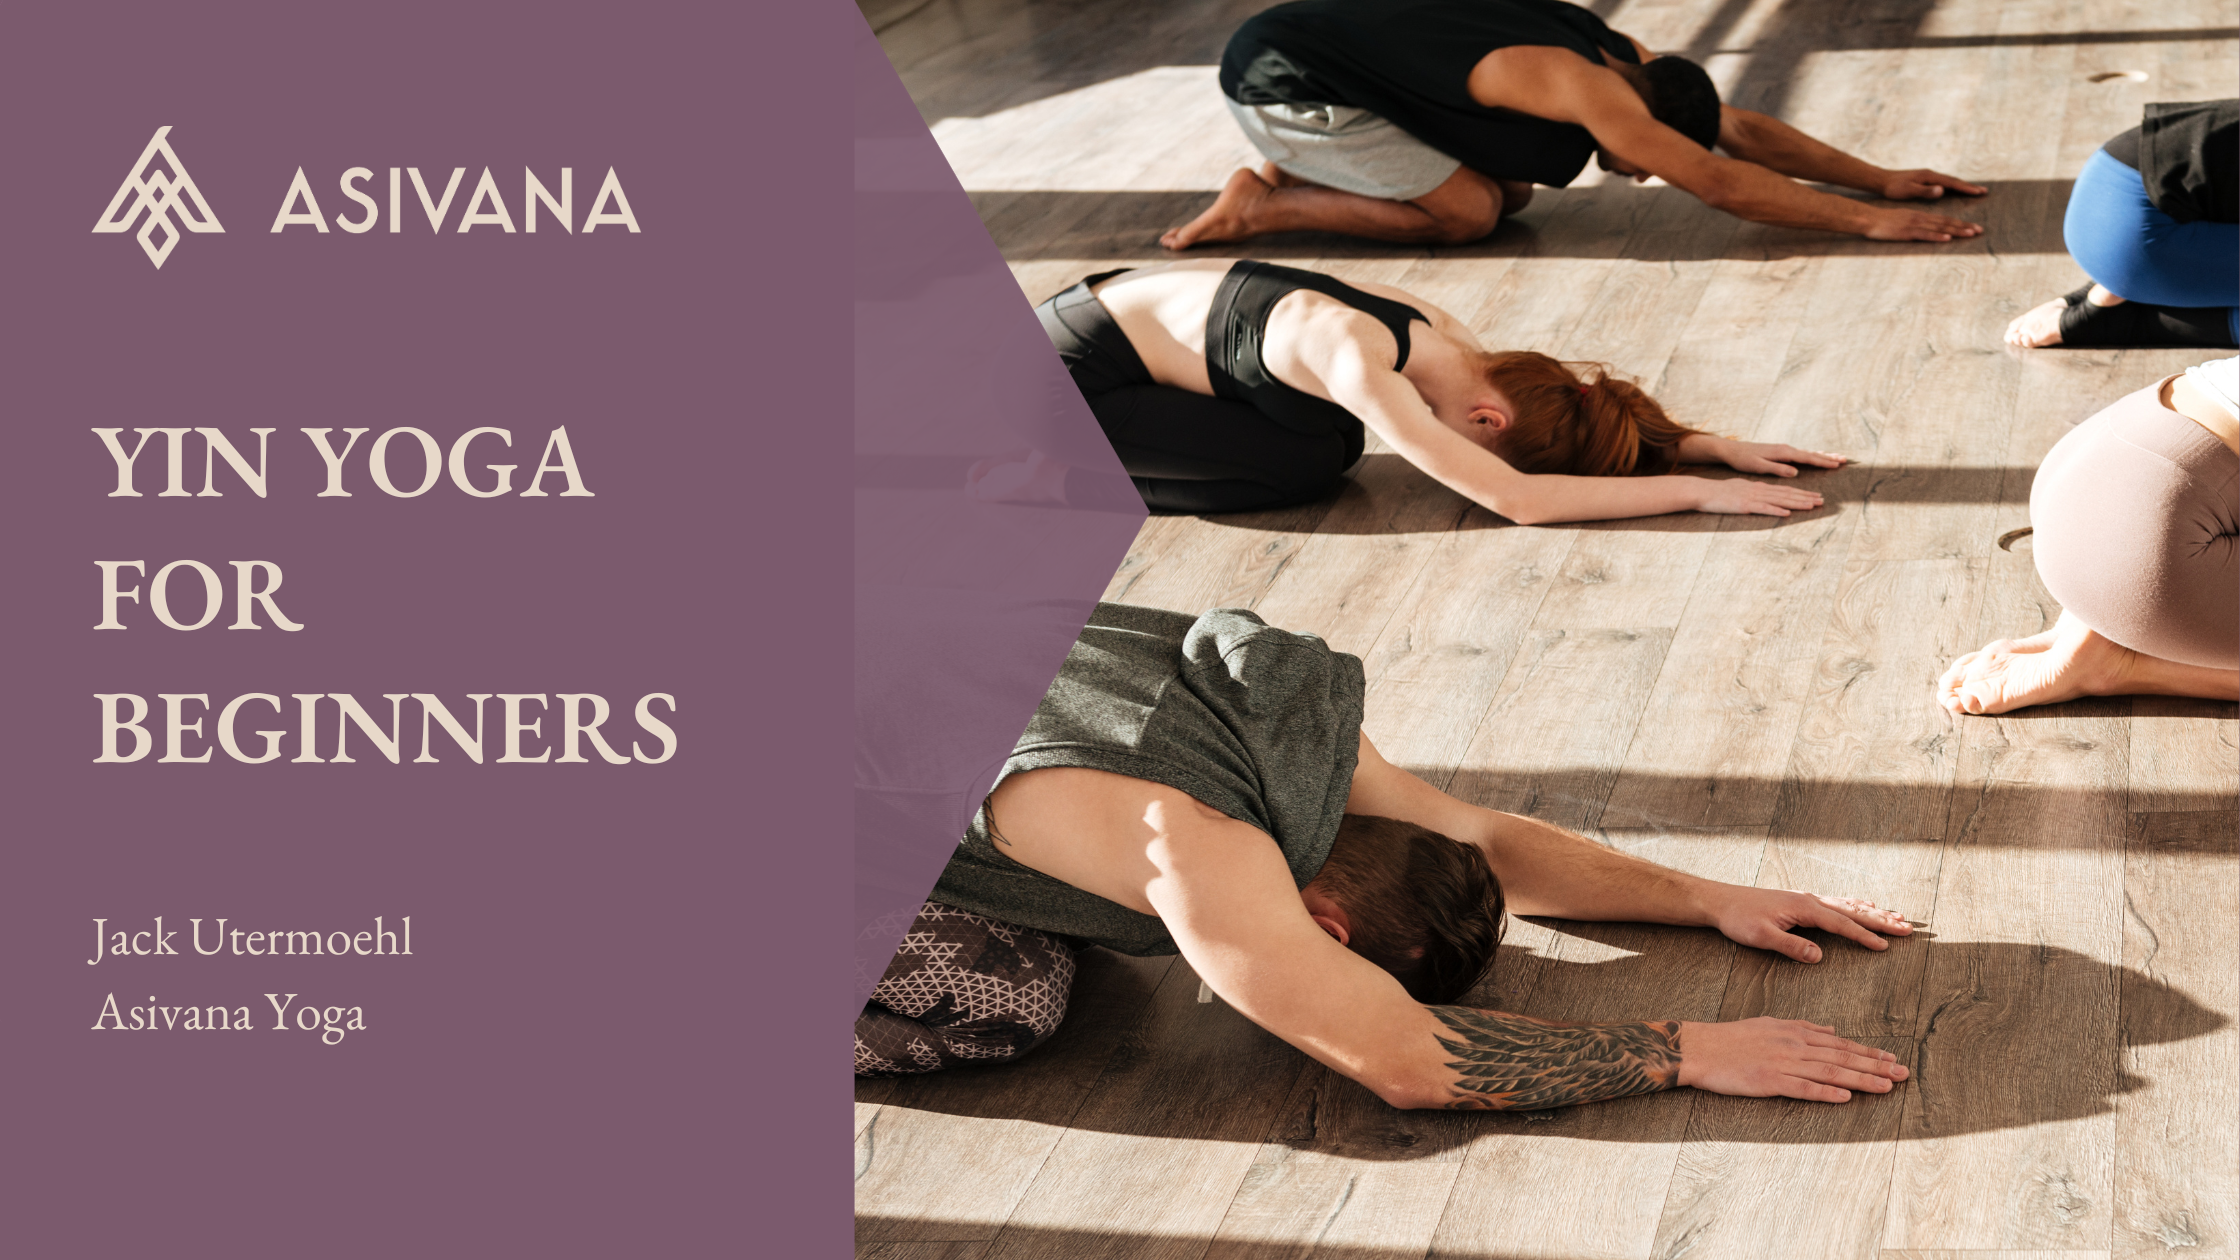 Try These 7 Partner Yoga Poses for Two - Goodnet